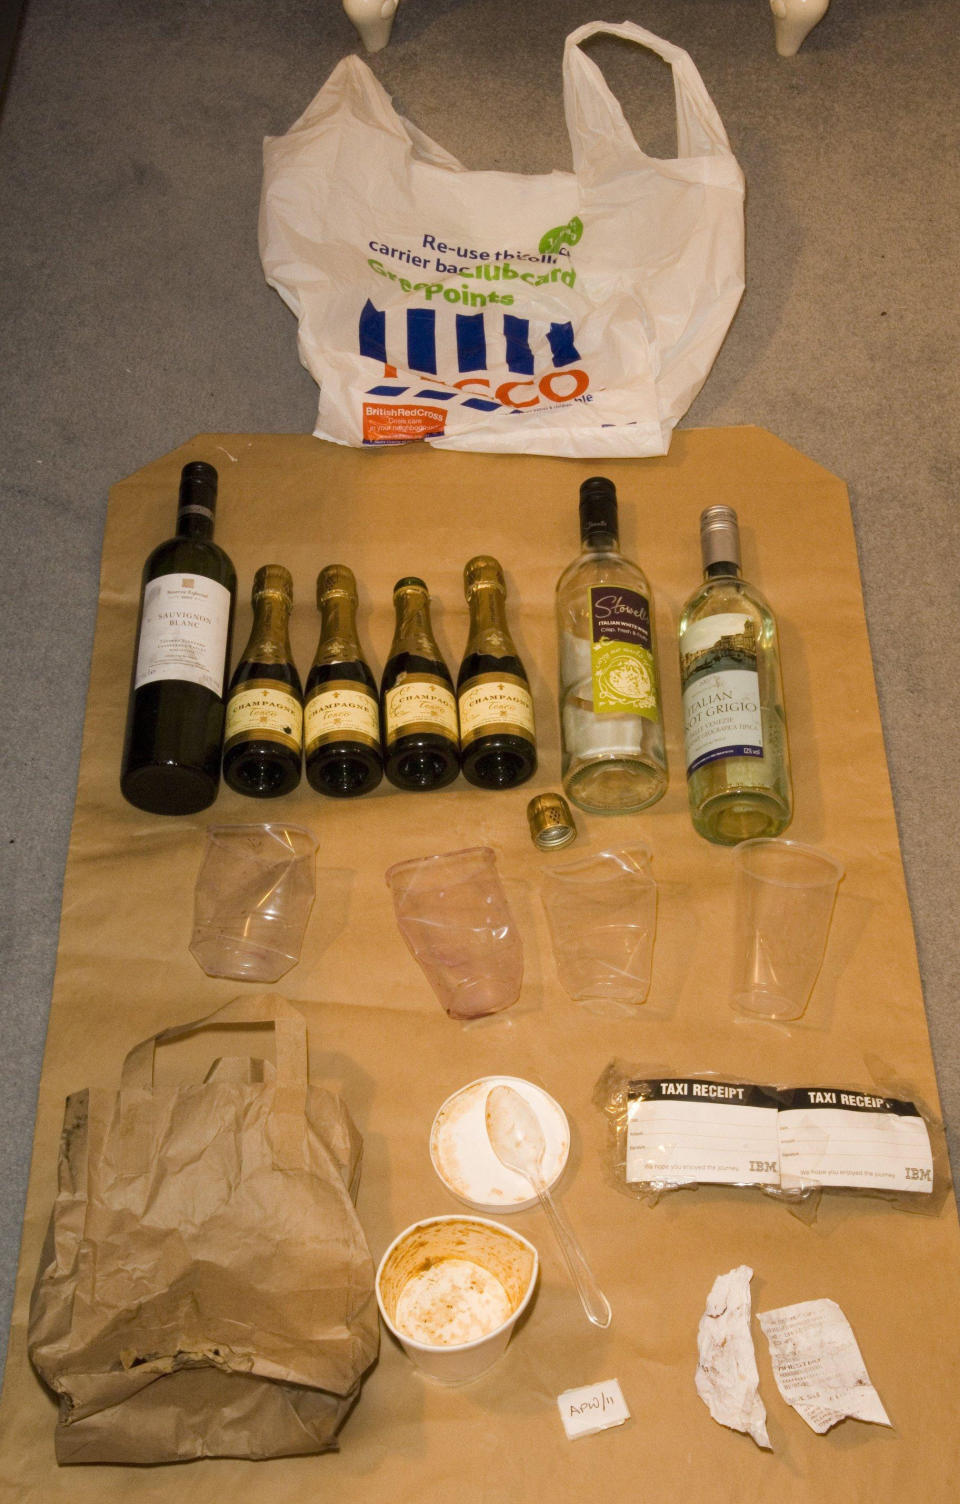 Bottles and other items seized from London cabbie rapist John Worboys, who is to be released from prison. (Met Police)